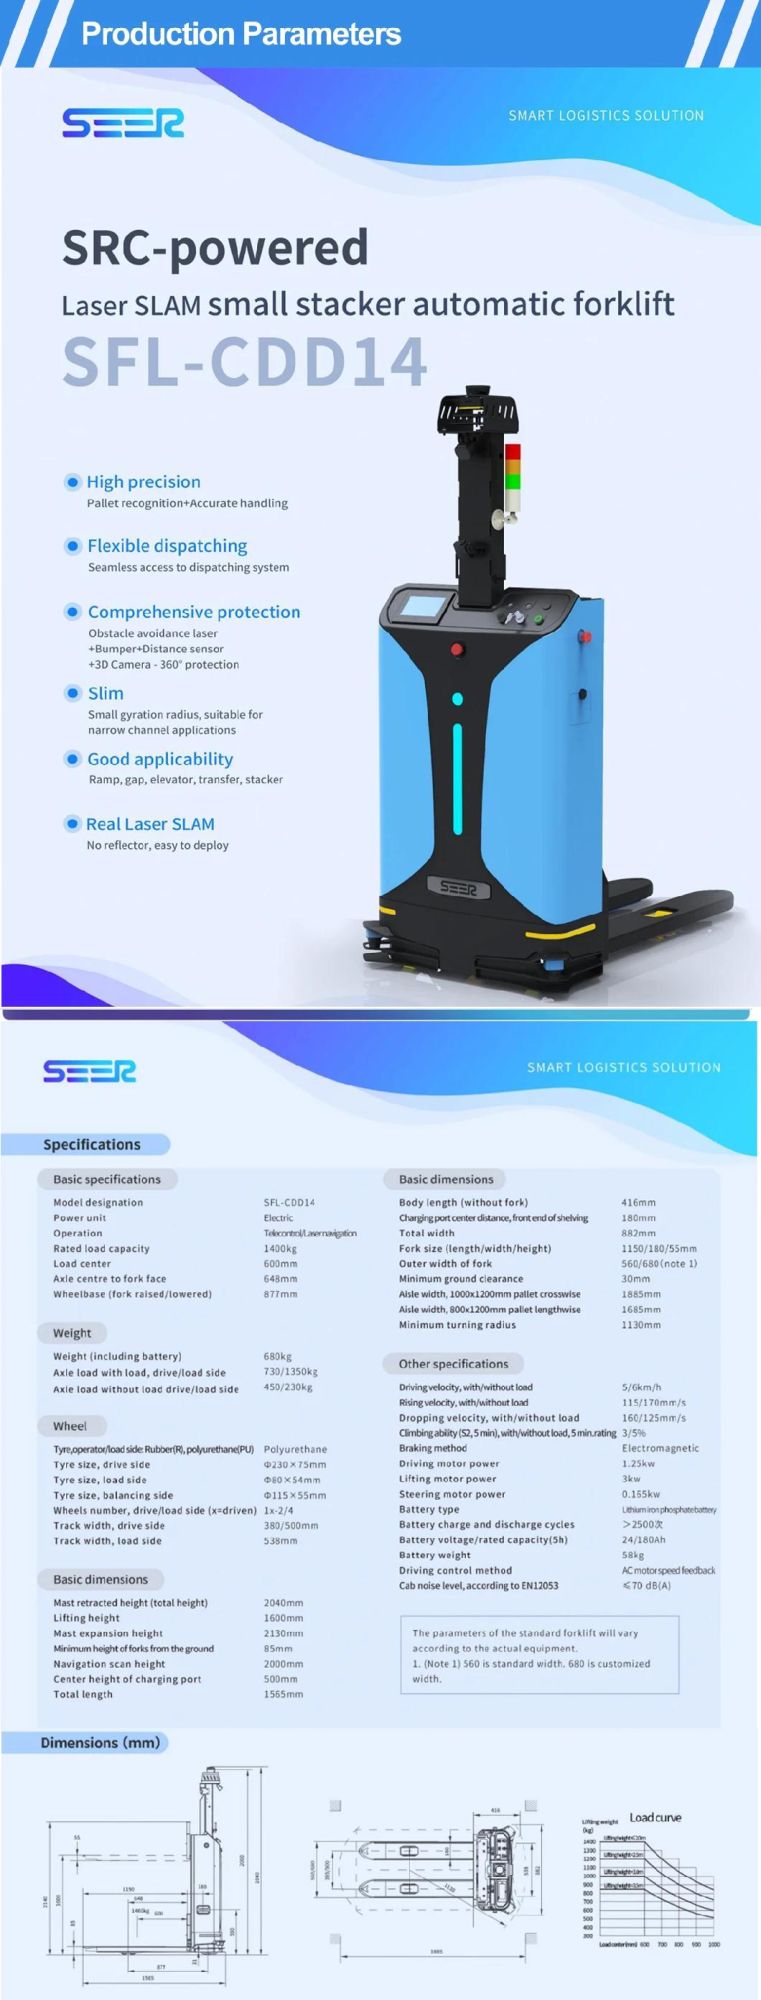 Speed Feedback Electromagnetic Brake Laser Slam Src-Powered Forklift Manufacture for Goods Moving, Stacking and Palletizing